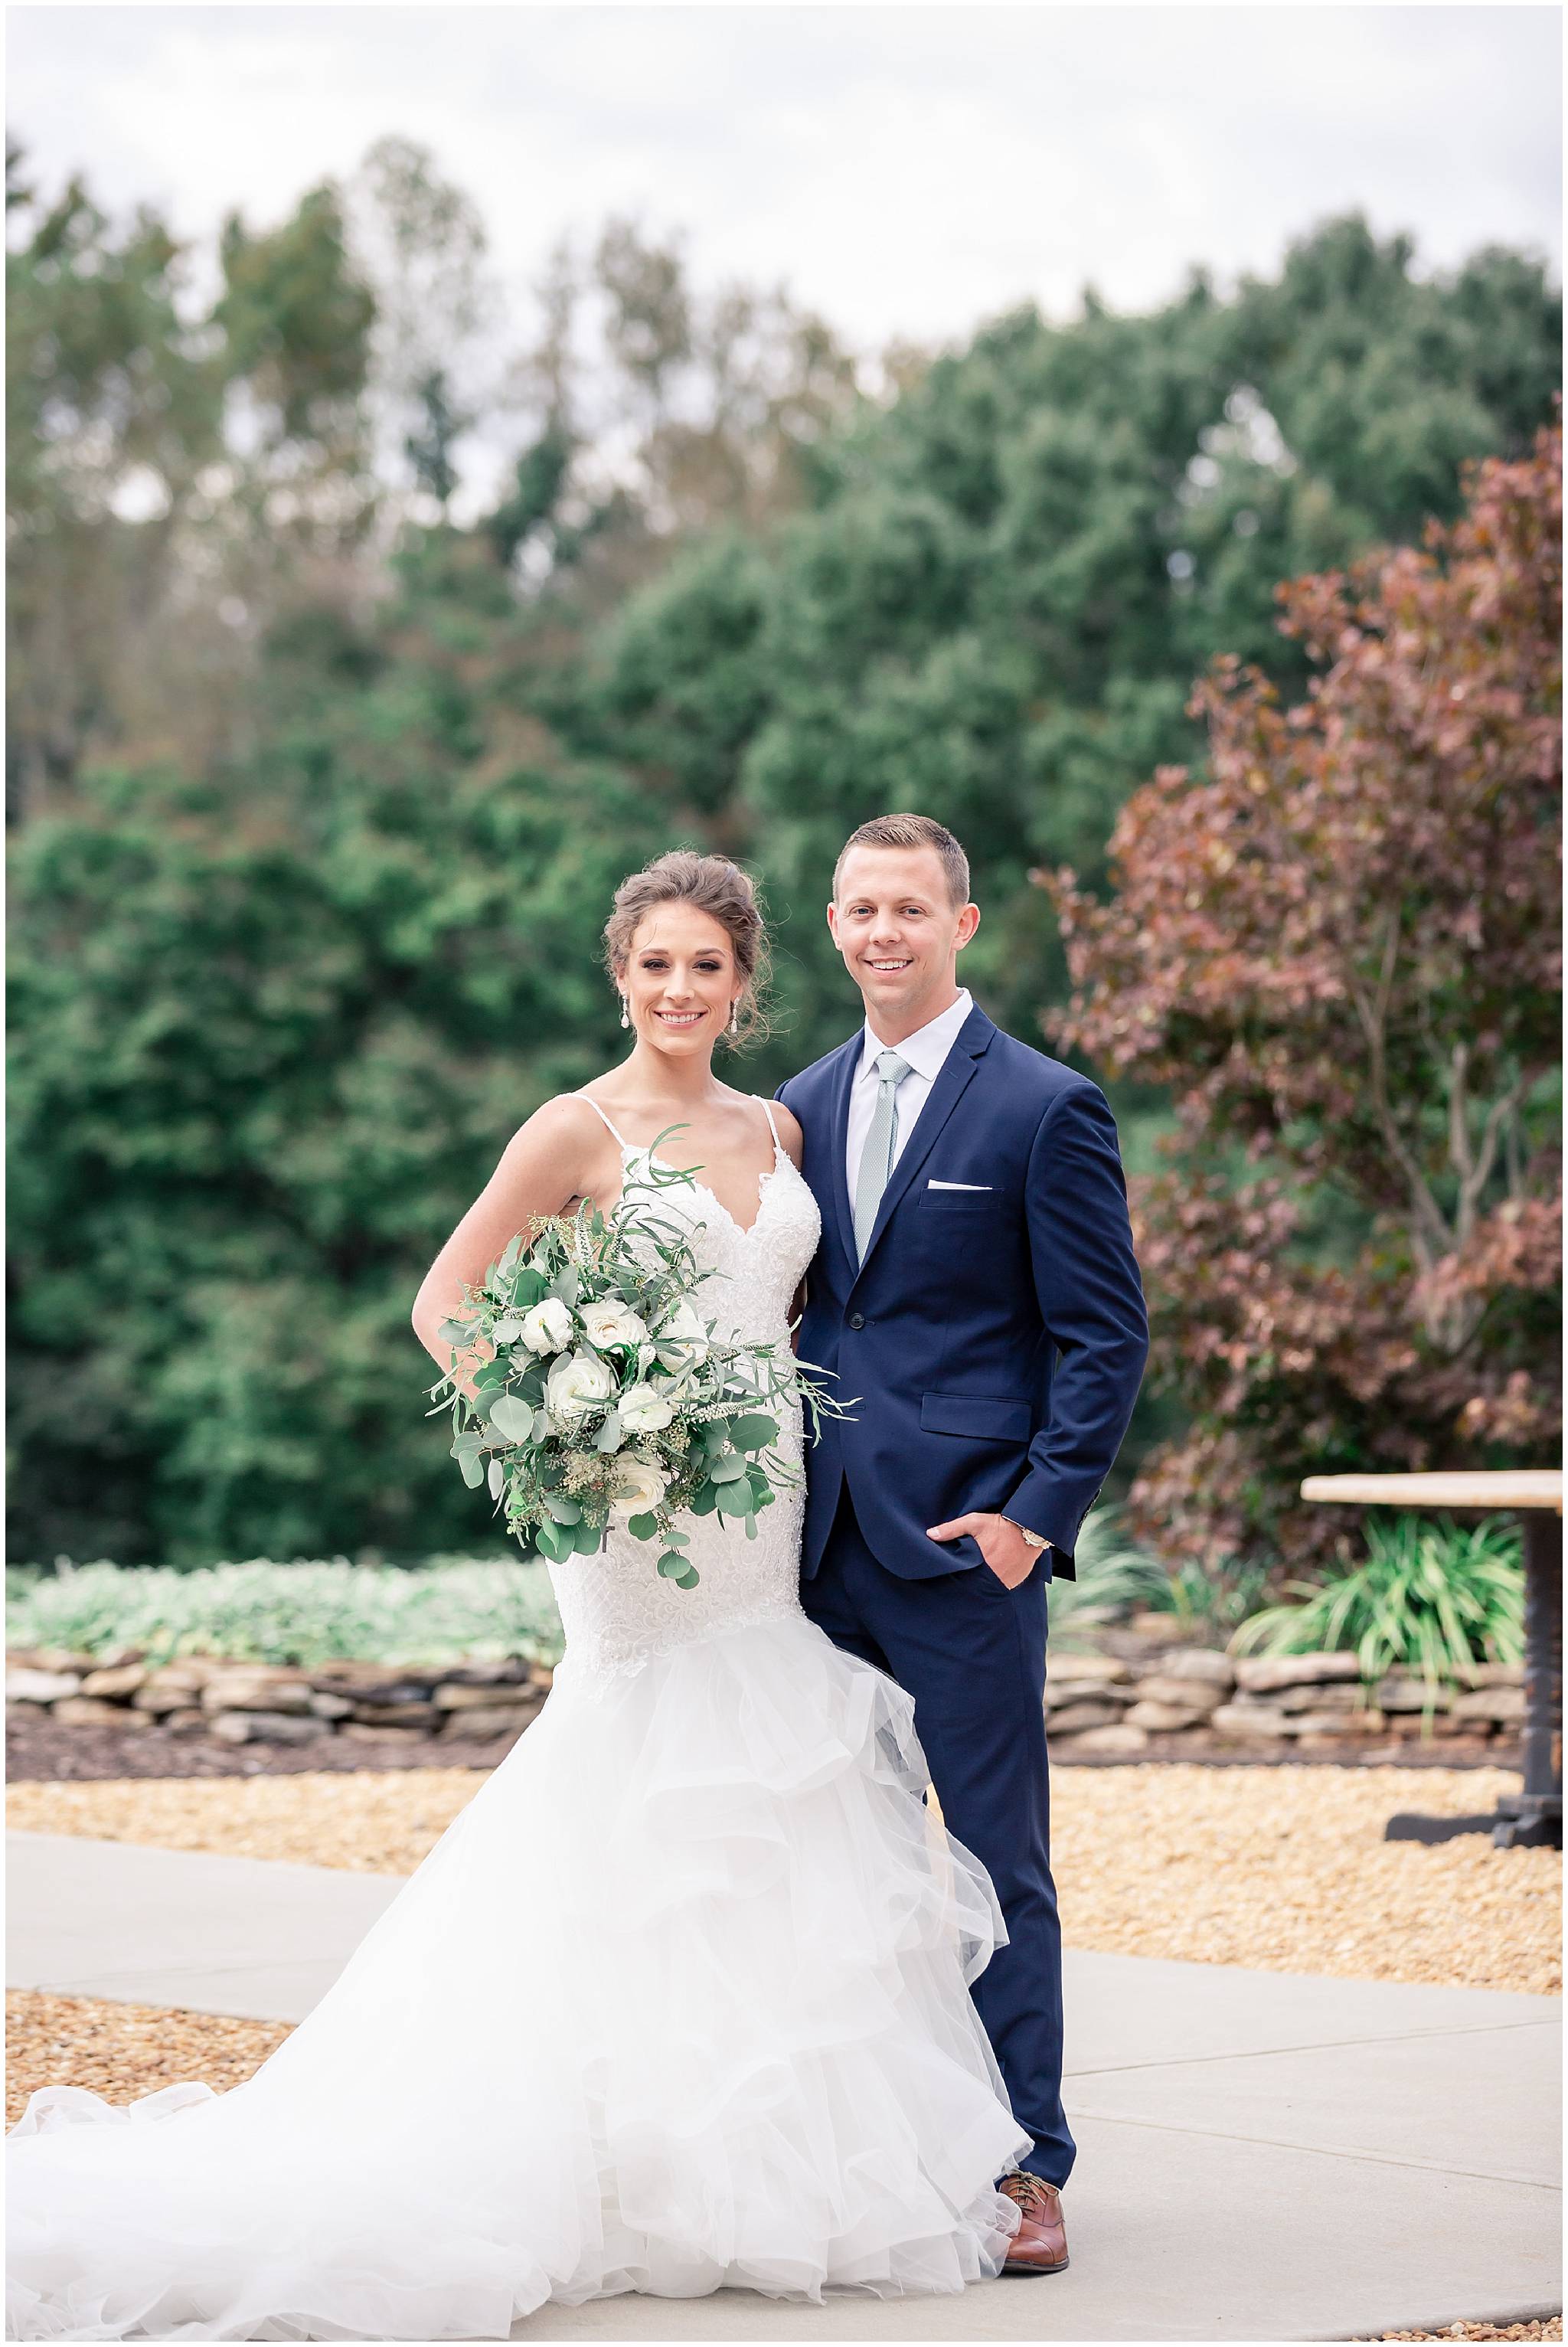 Grant hill farms wedding first look pictures